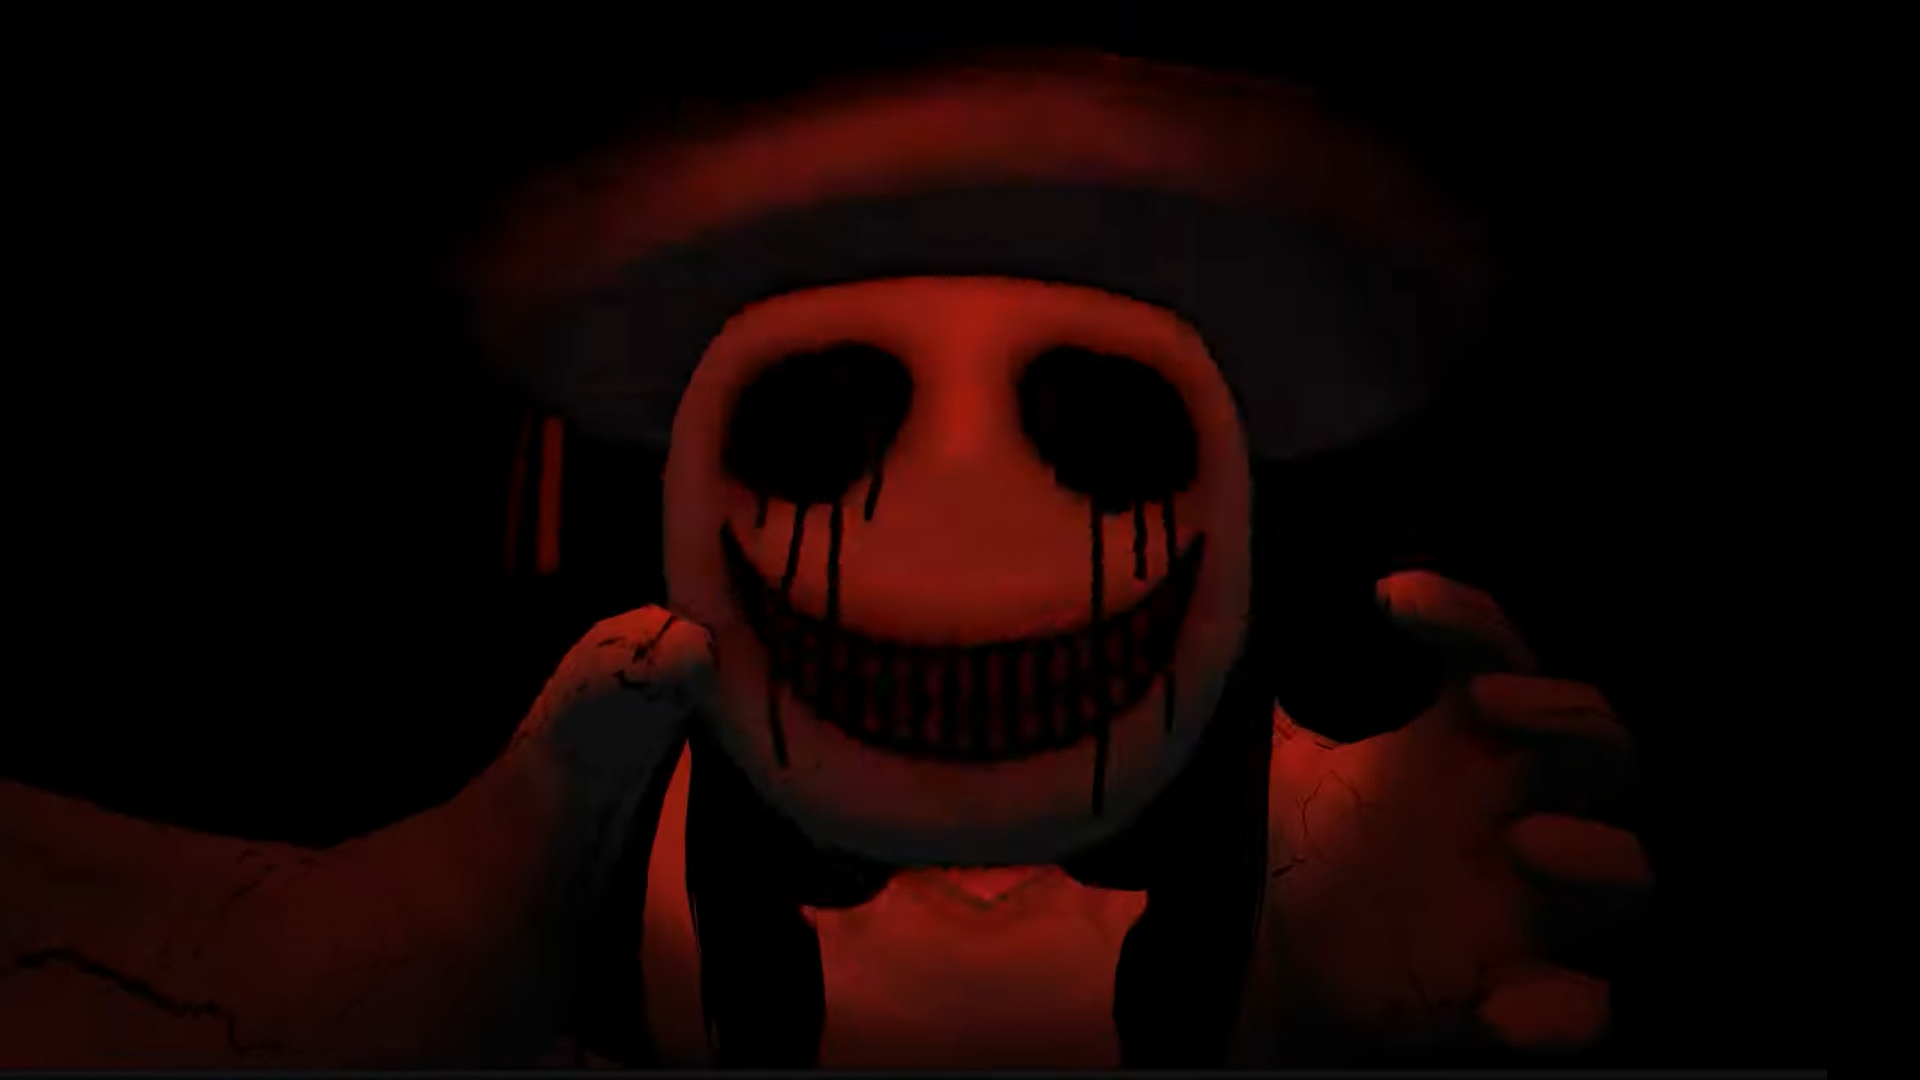 THE MIMIC (ROBLOX VER.)  Did no one notice that every monster in